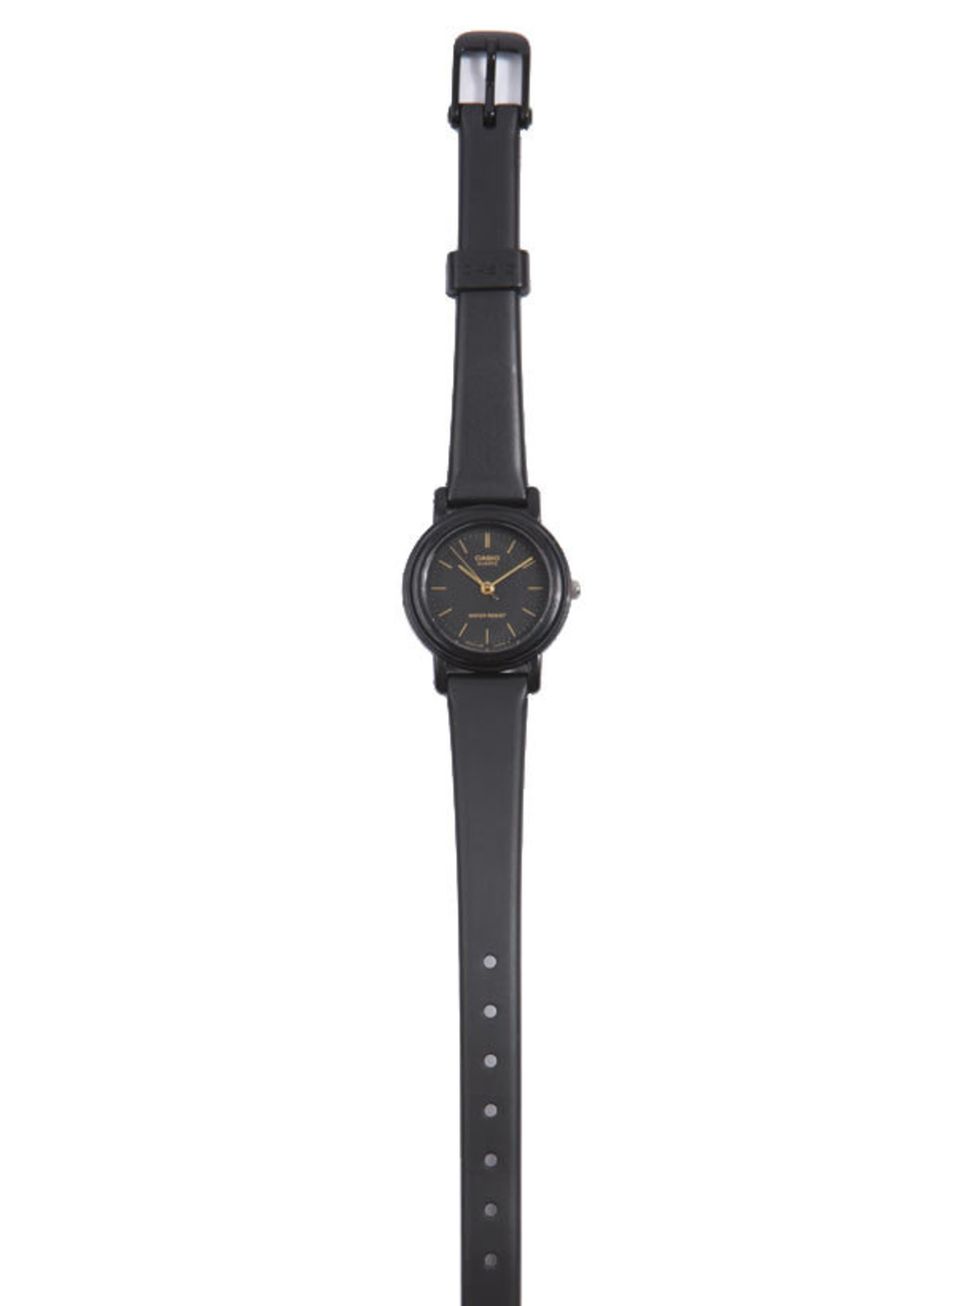 <p>Casio dial watch, £20, at <a href="http://www.urbanoutfitters.co.uk/casio-black-dial-watch/invt/5769424691392/&amp;bklist=icat,5,shop,christmas,christmasbrands,womenscasio">Urban Outfitters</a></p>